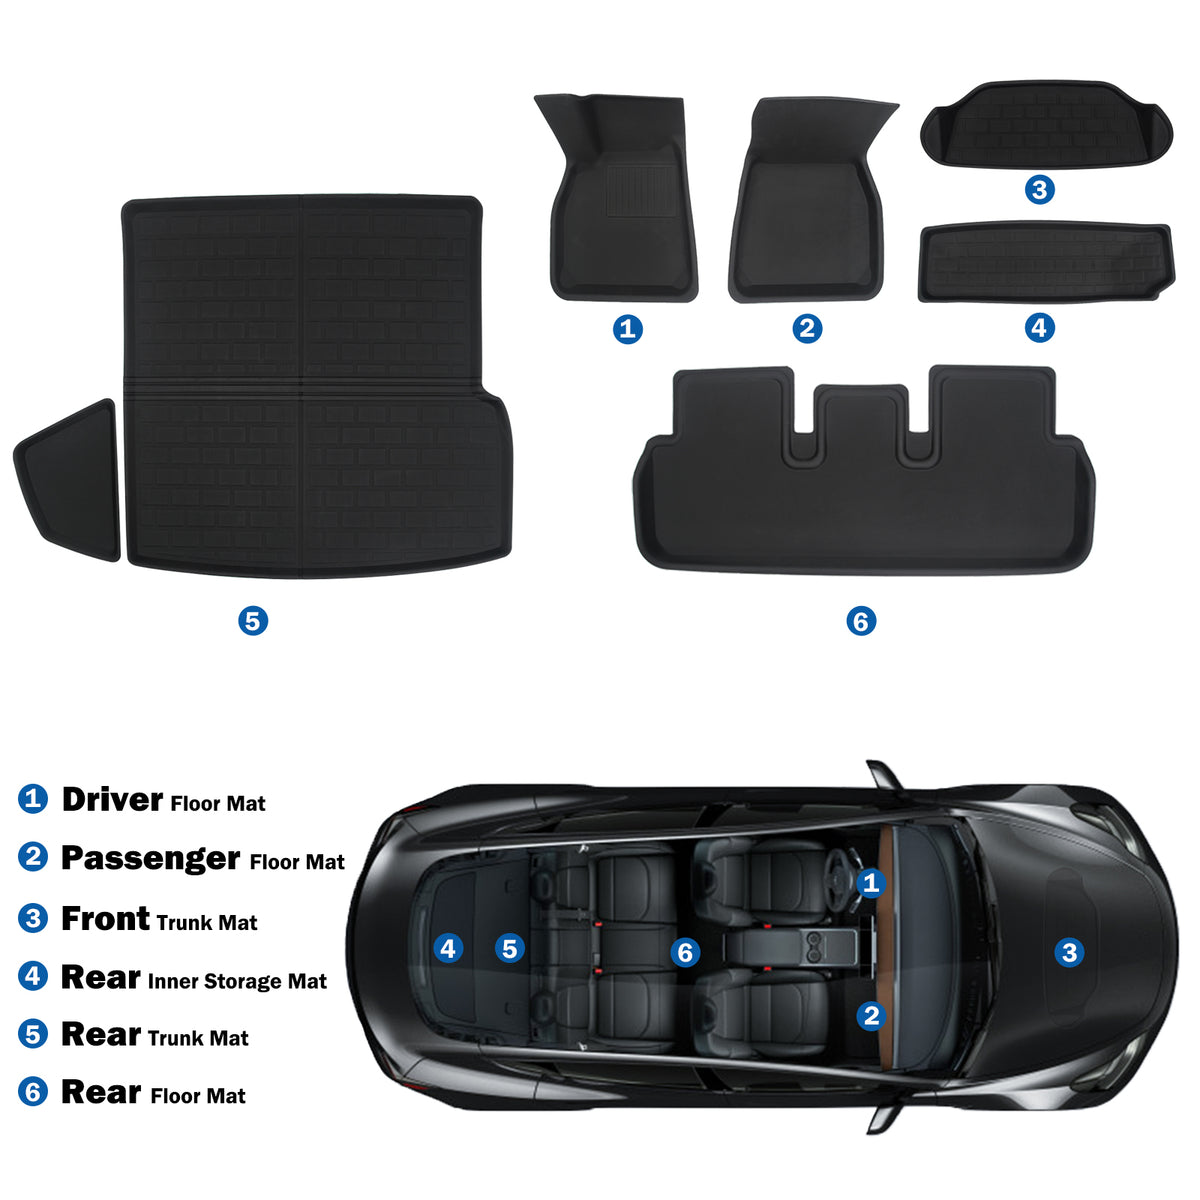 TUROAZ All Weather Floor Mats Compatible with Tesla Model S 2023 2022 2021, Custom 3D Fit Front Rear Tray, Cargo Liner, Trunk Mats Car Interior Accessories, Waterproof Anti-Slip (Full Set of 6)